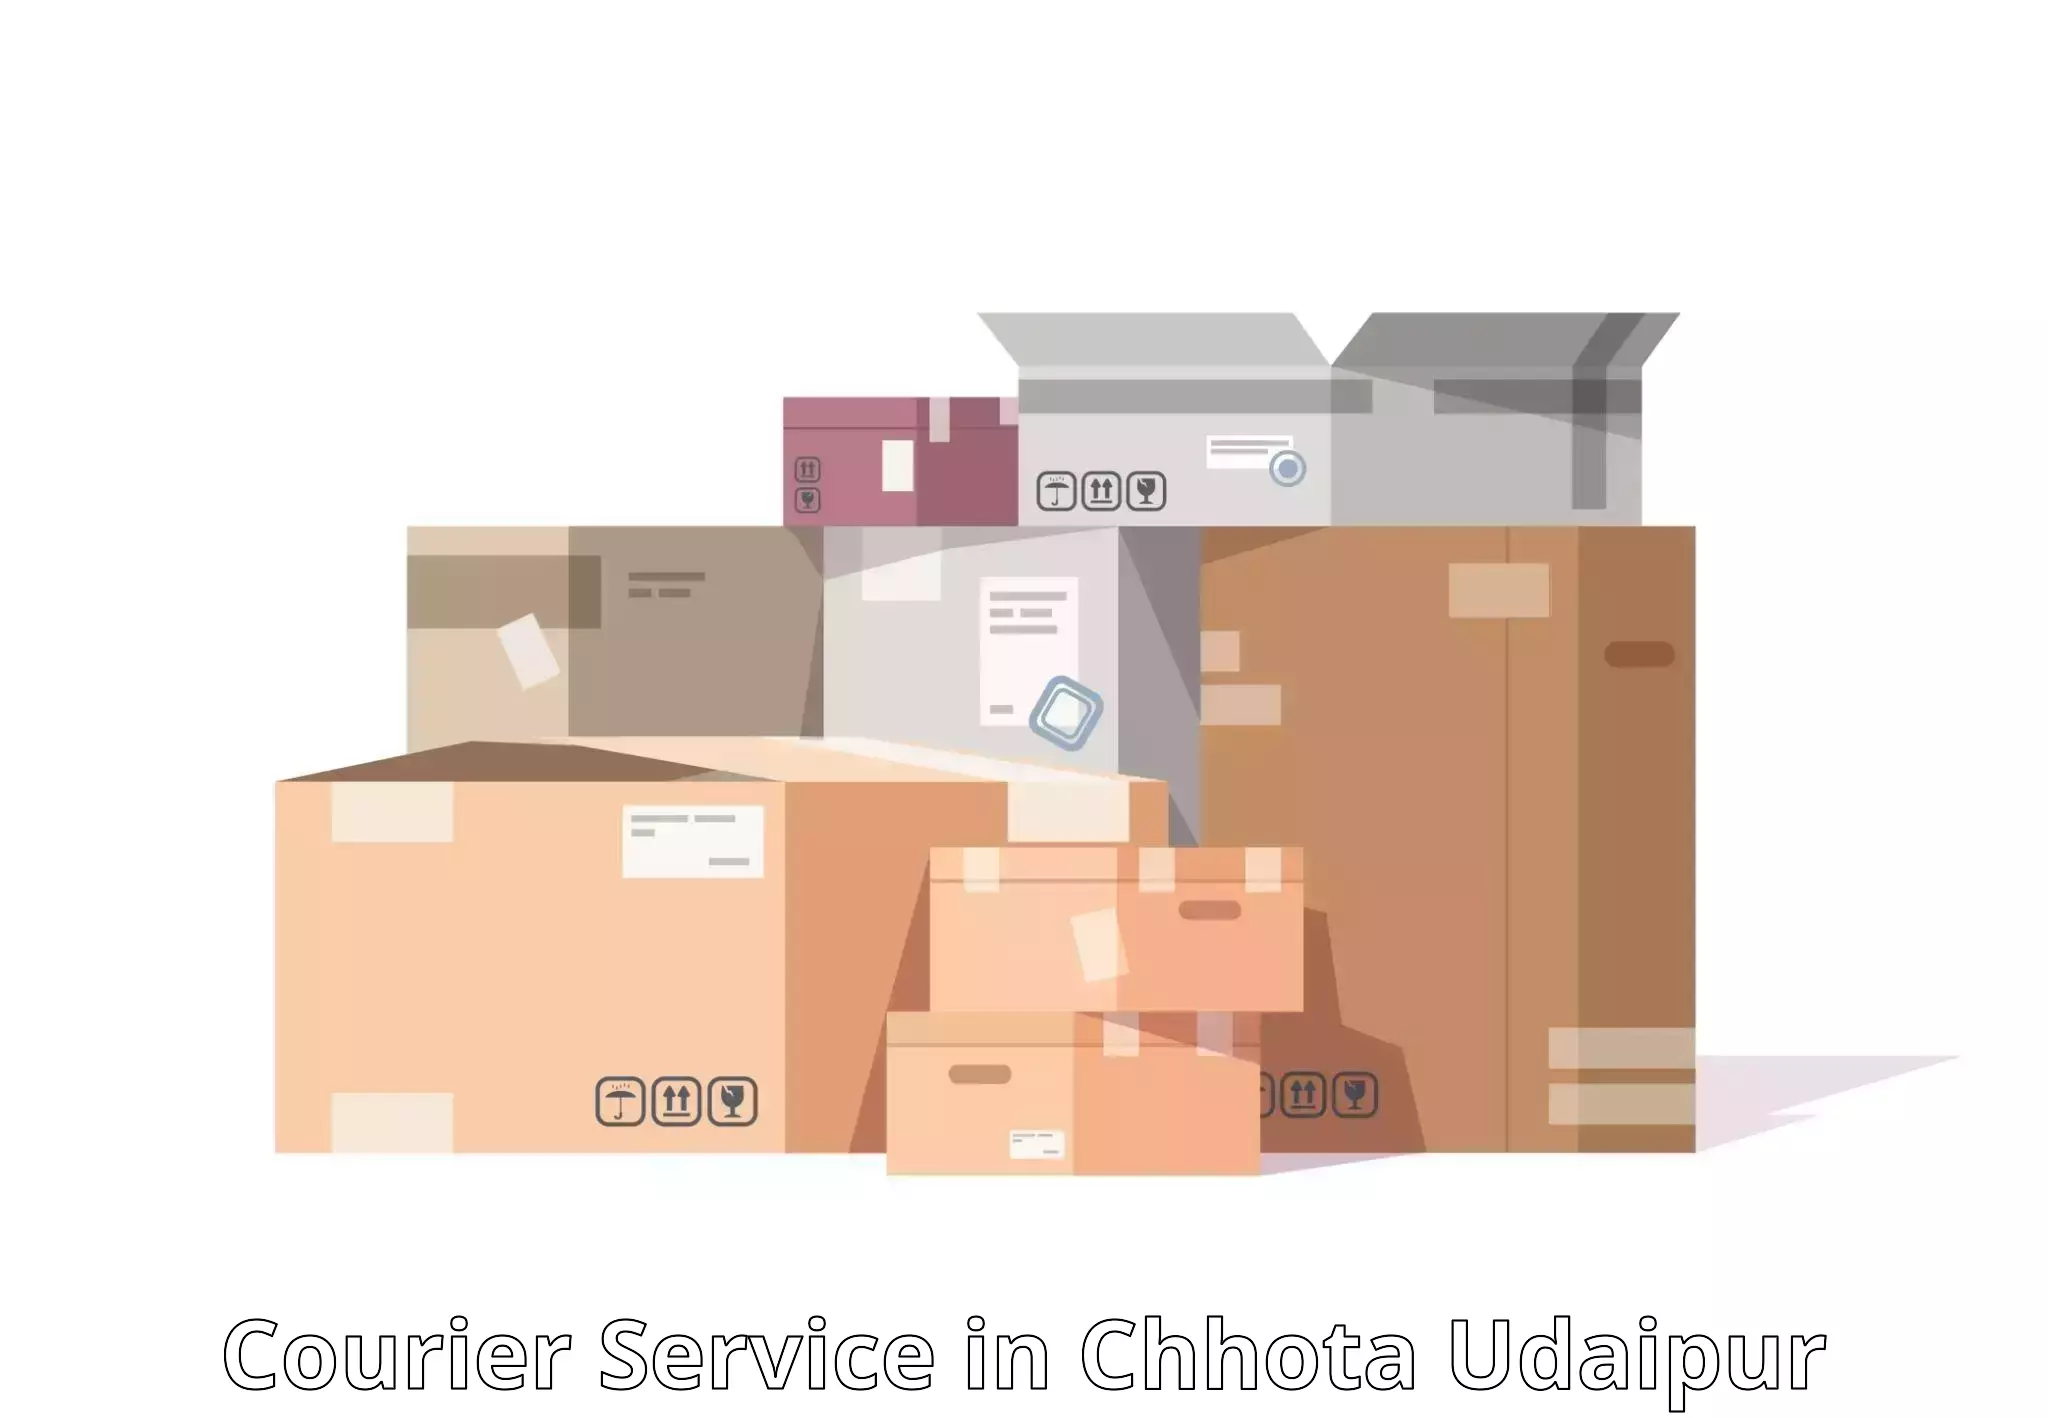 Enhanced shipping experience in Chhota Udaipur